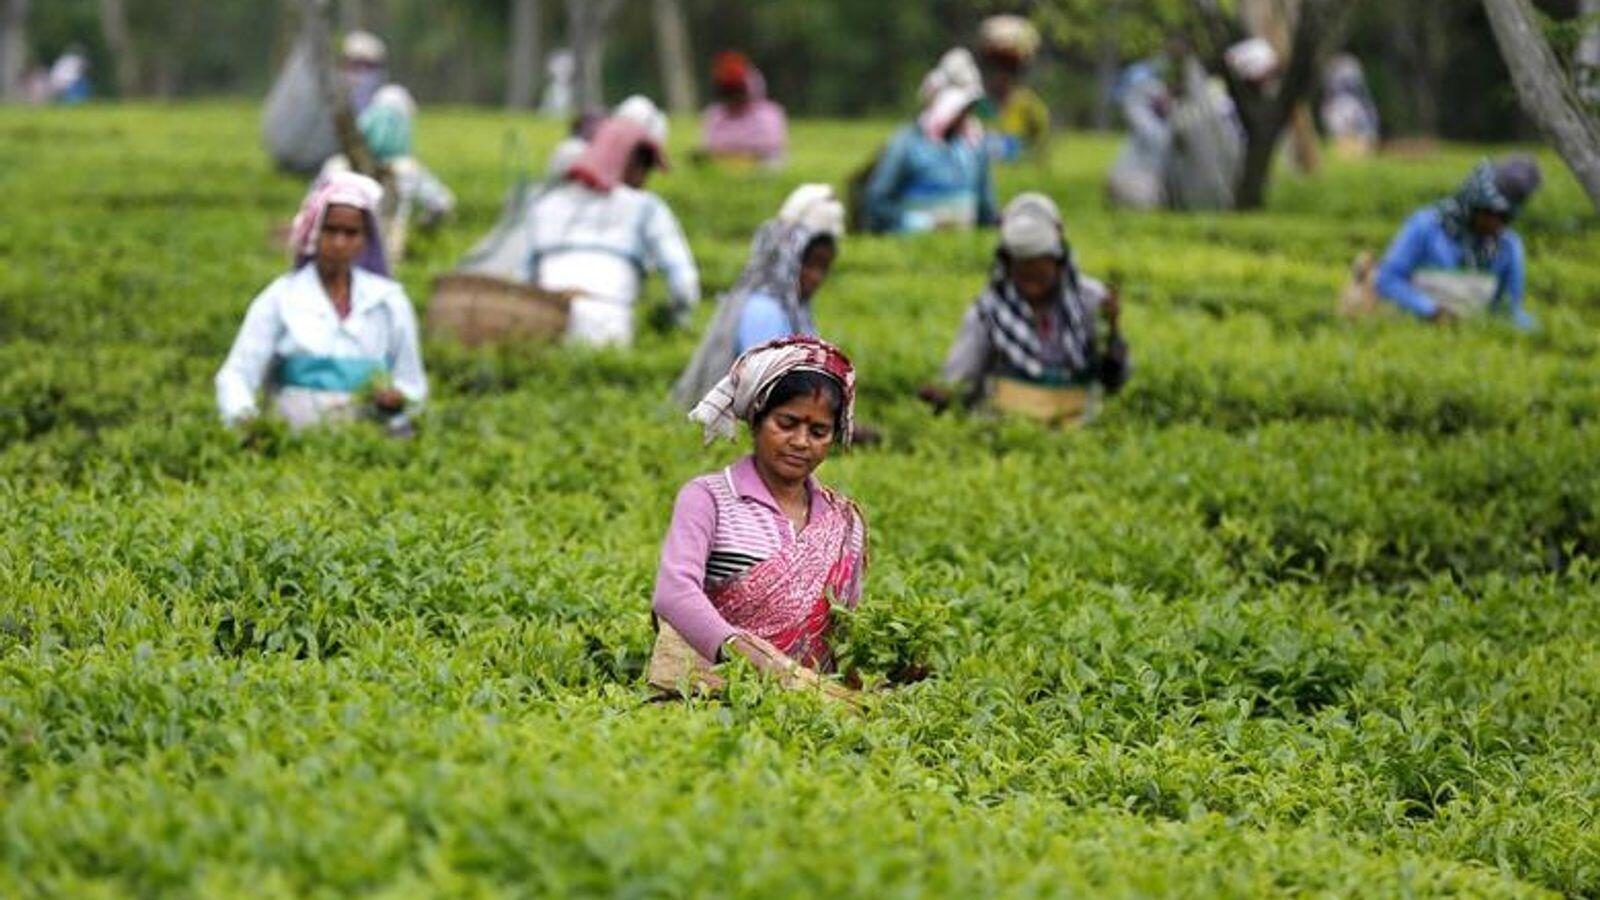 UAE emerges as  India’s second top tea importer - News